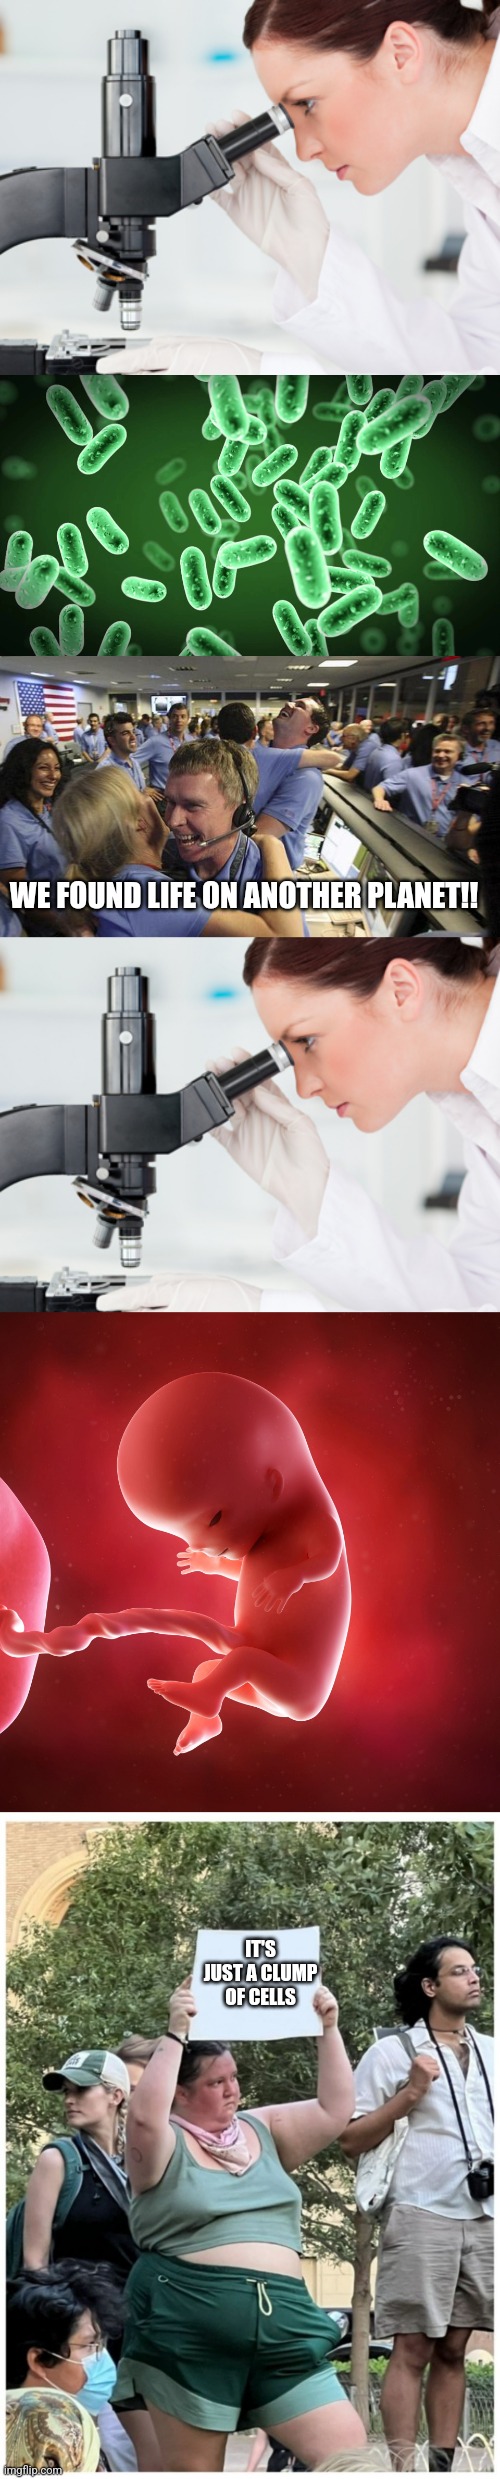 WE FOUND LIFE ON ANOTHER PLANET!! IT'S JUST A CLUMP OF CELLS | image tagged in scientist microscope,green bacteria,nasa employee hugging,fetus,abortion protest | made w/ Imgflip meme maker